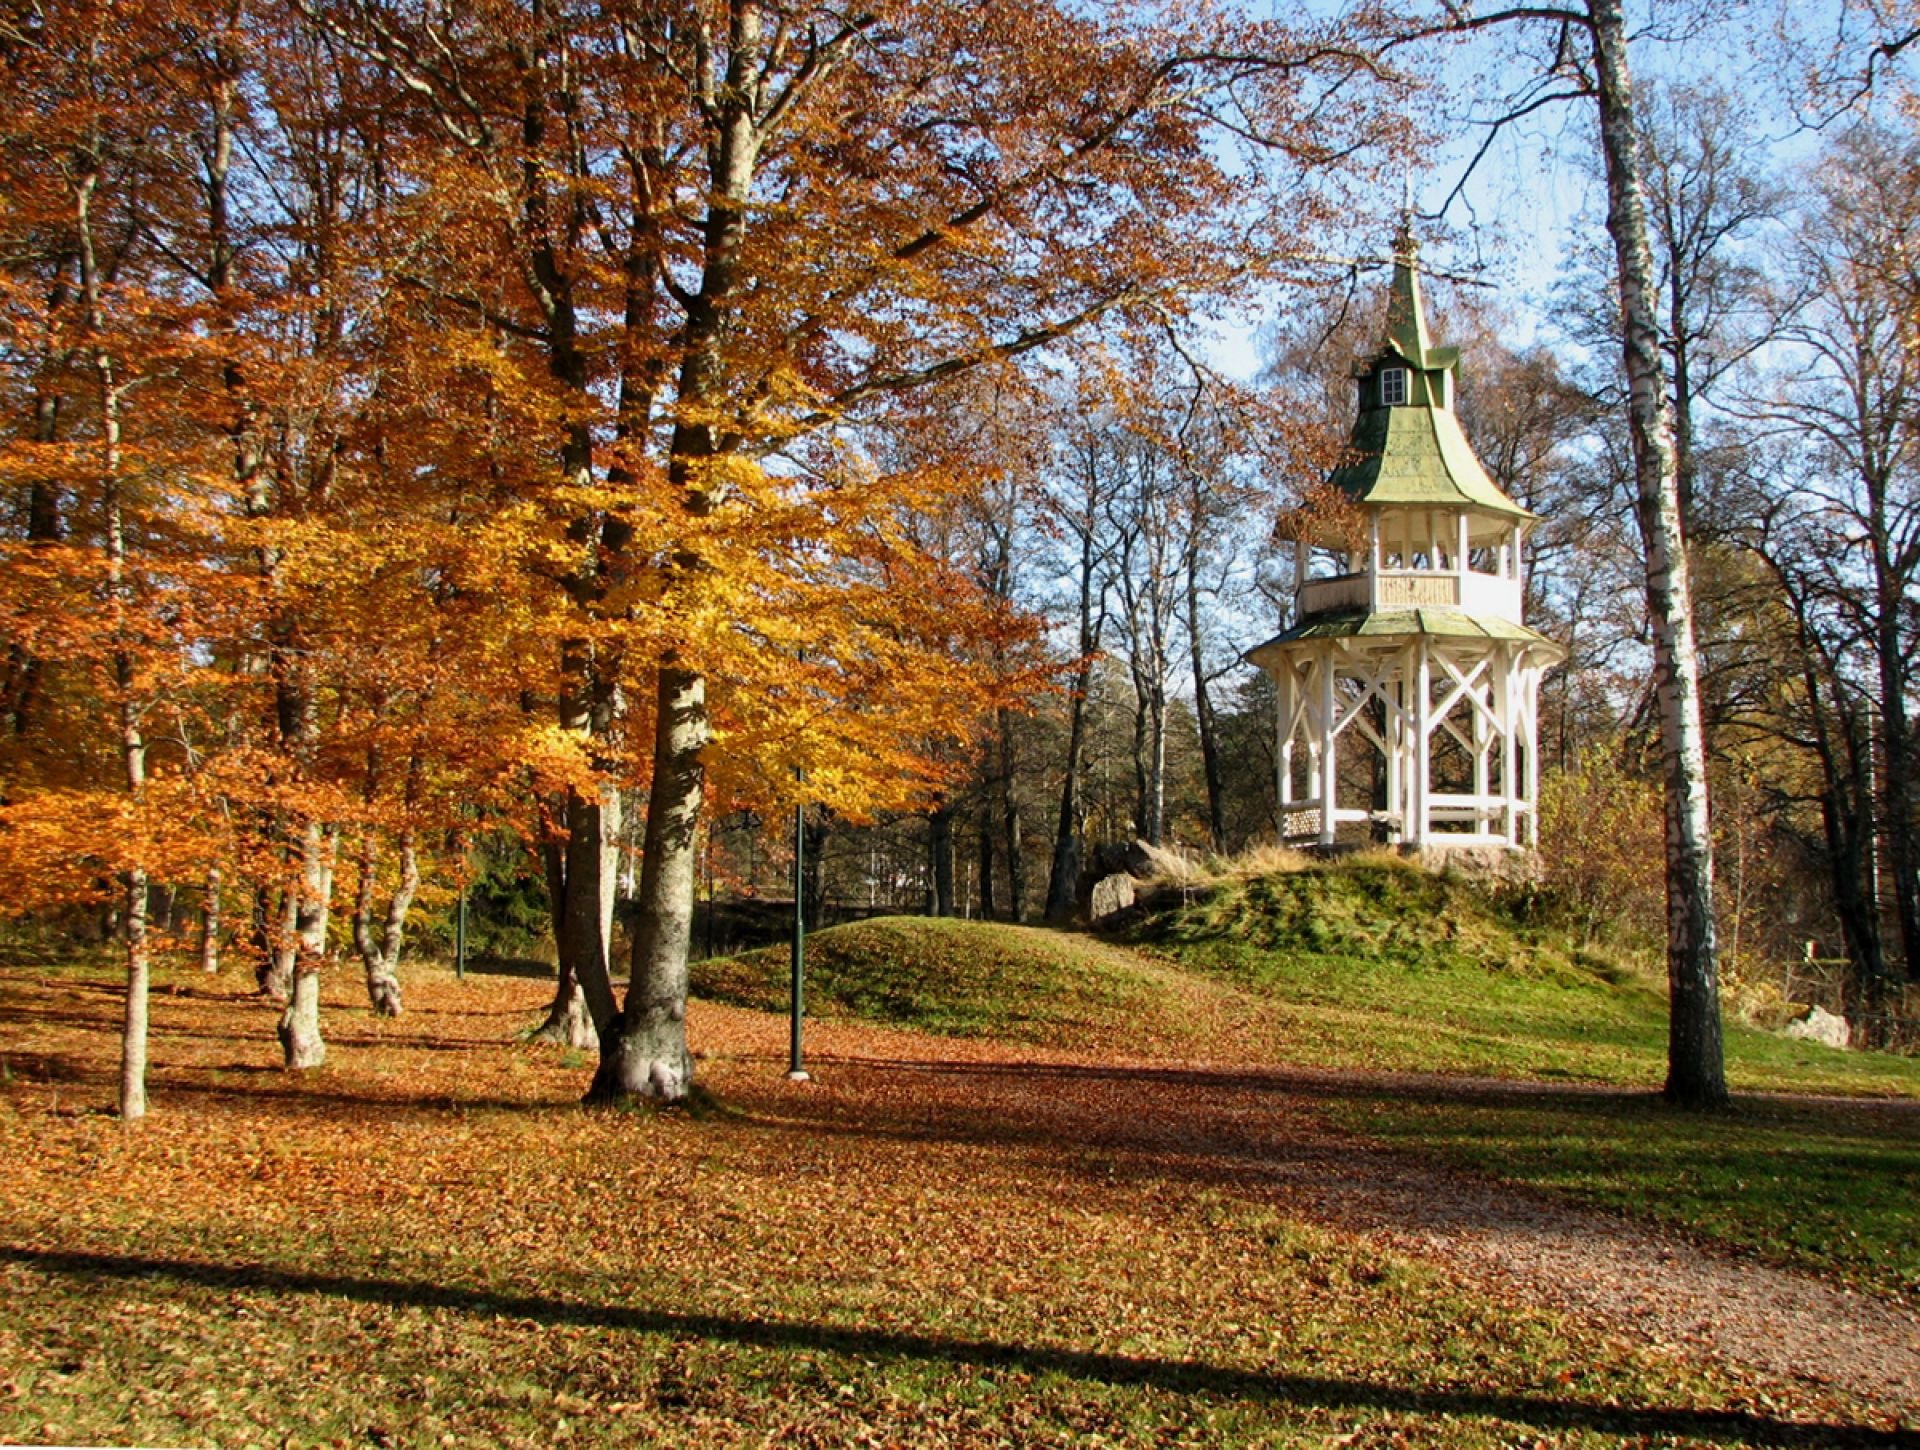 The park area at Marieberg